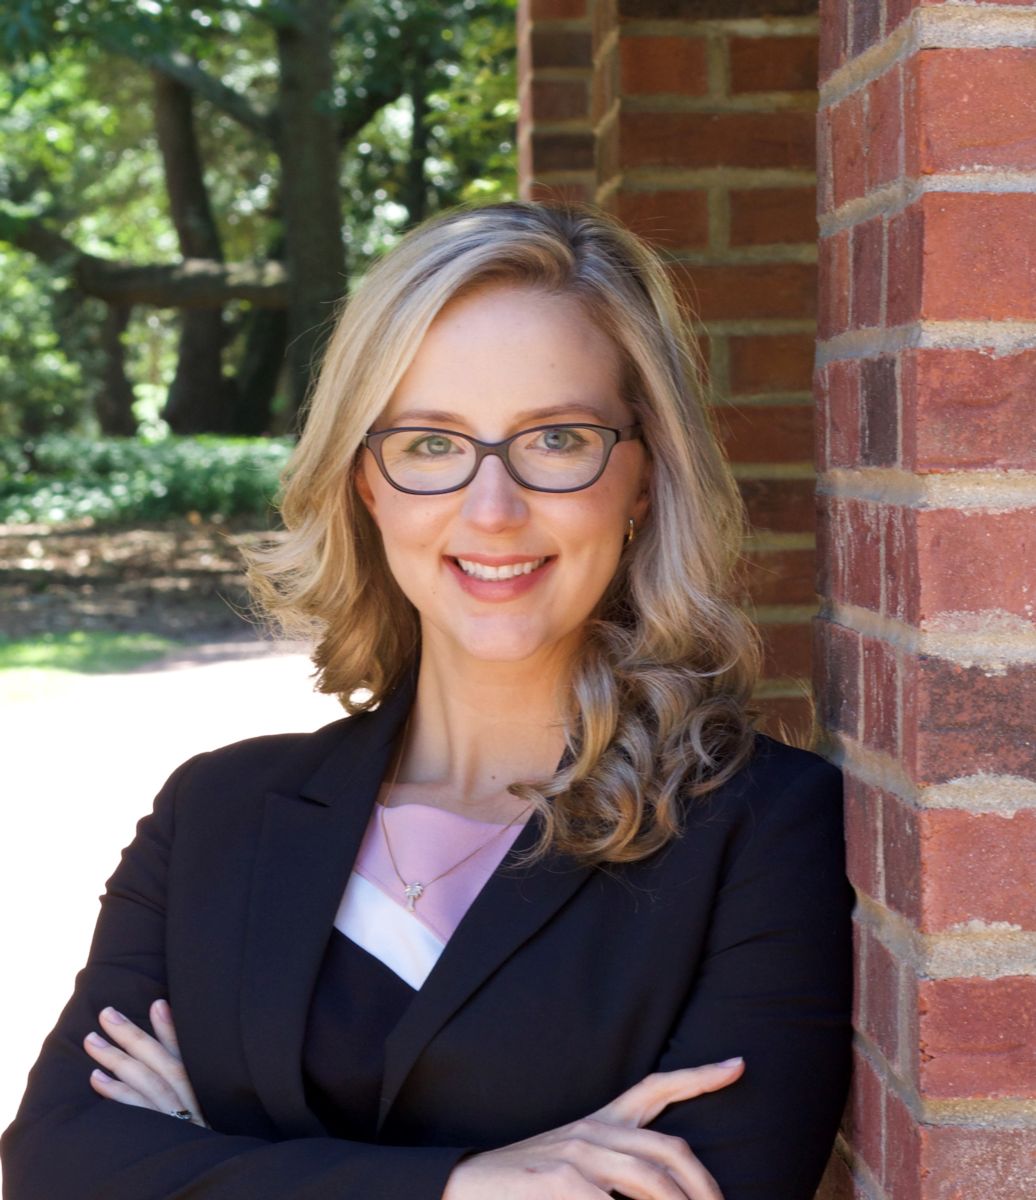 Ms. Marissa Smith, a Caucasian female with long blond hair wears black rimmed glasses and a black suit jacket with a white shirt while smiling at the camera.